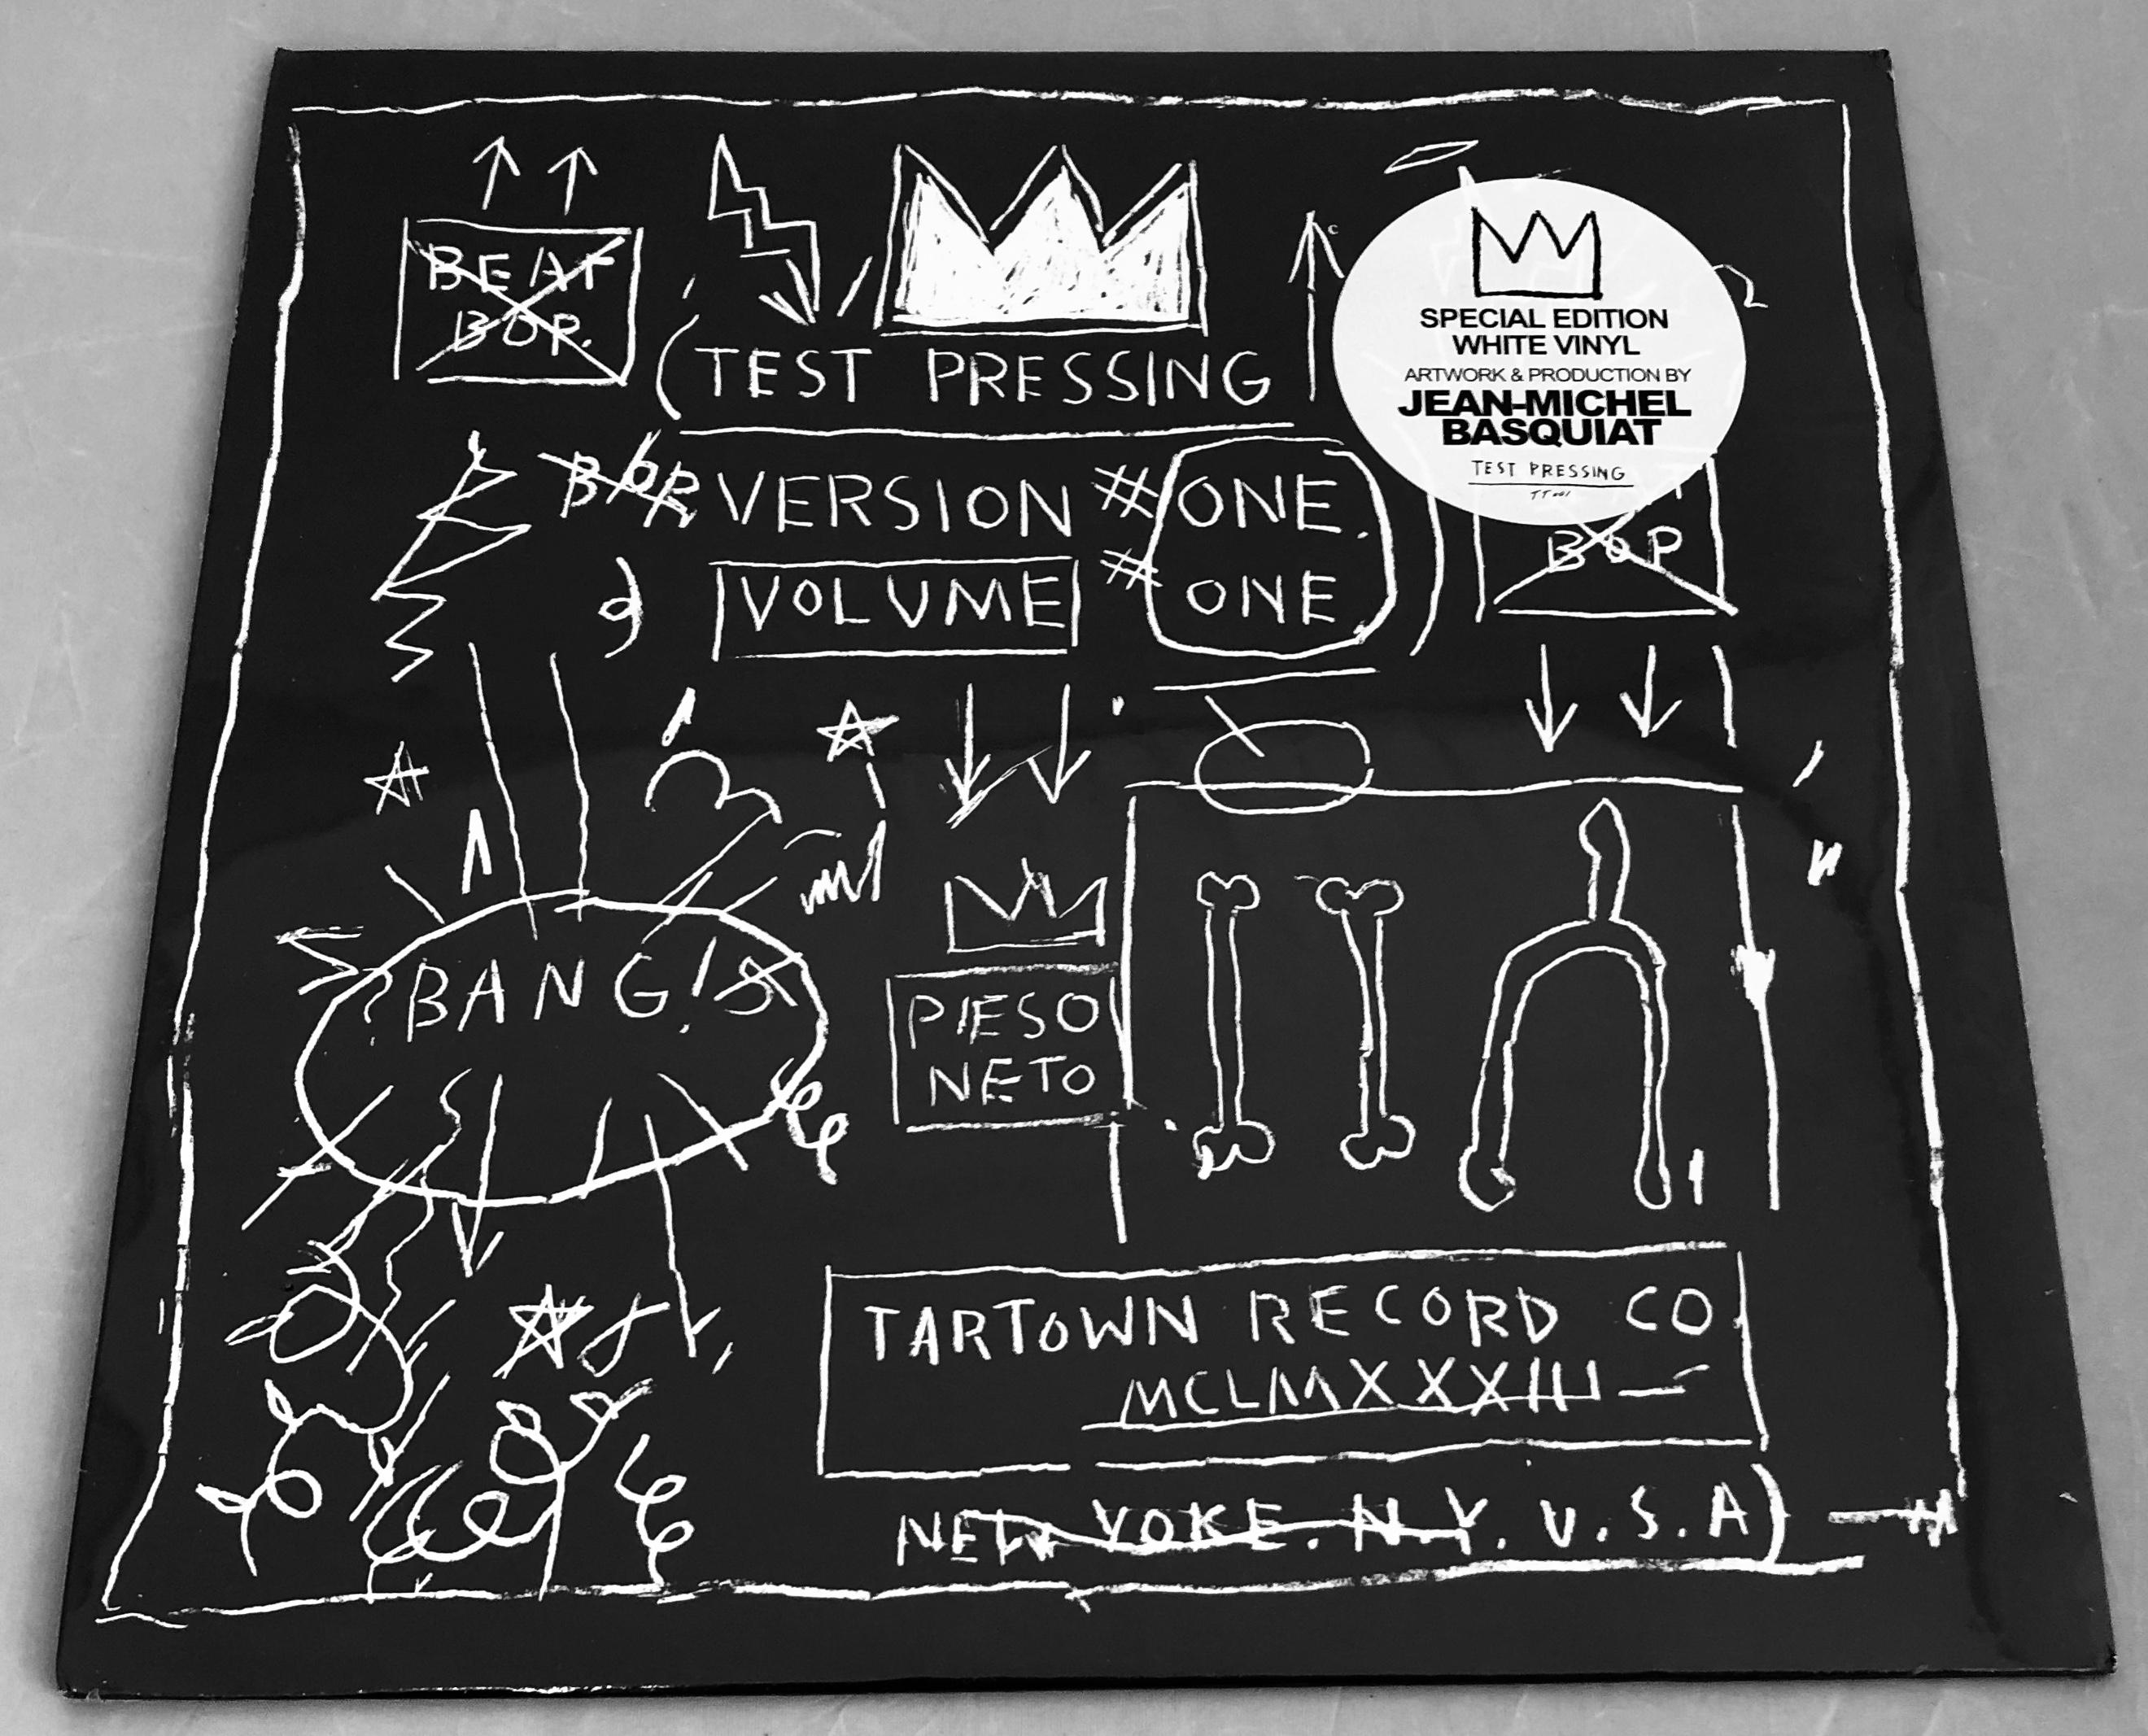 Jean-Michel Basquiat Beat Bop Vinyl Record. New and sealed in its original packaging. Special edition White vinyl pressing published circa early 2000s. 

Basquiat's history with rap music runs deep. That connection was most visible in the “Beat Bop”